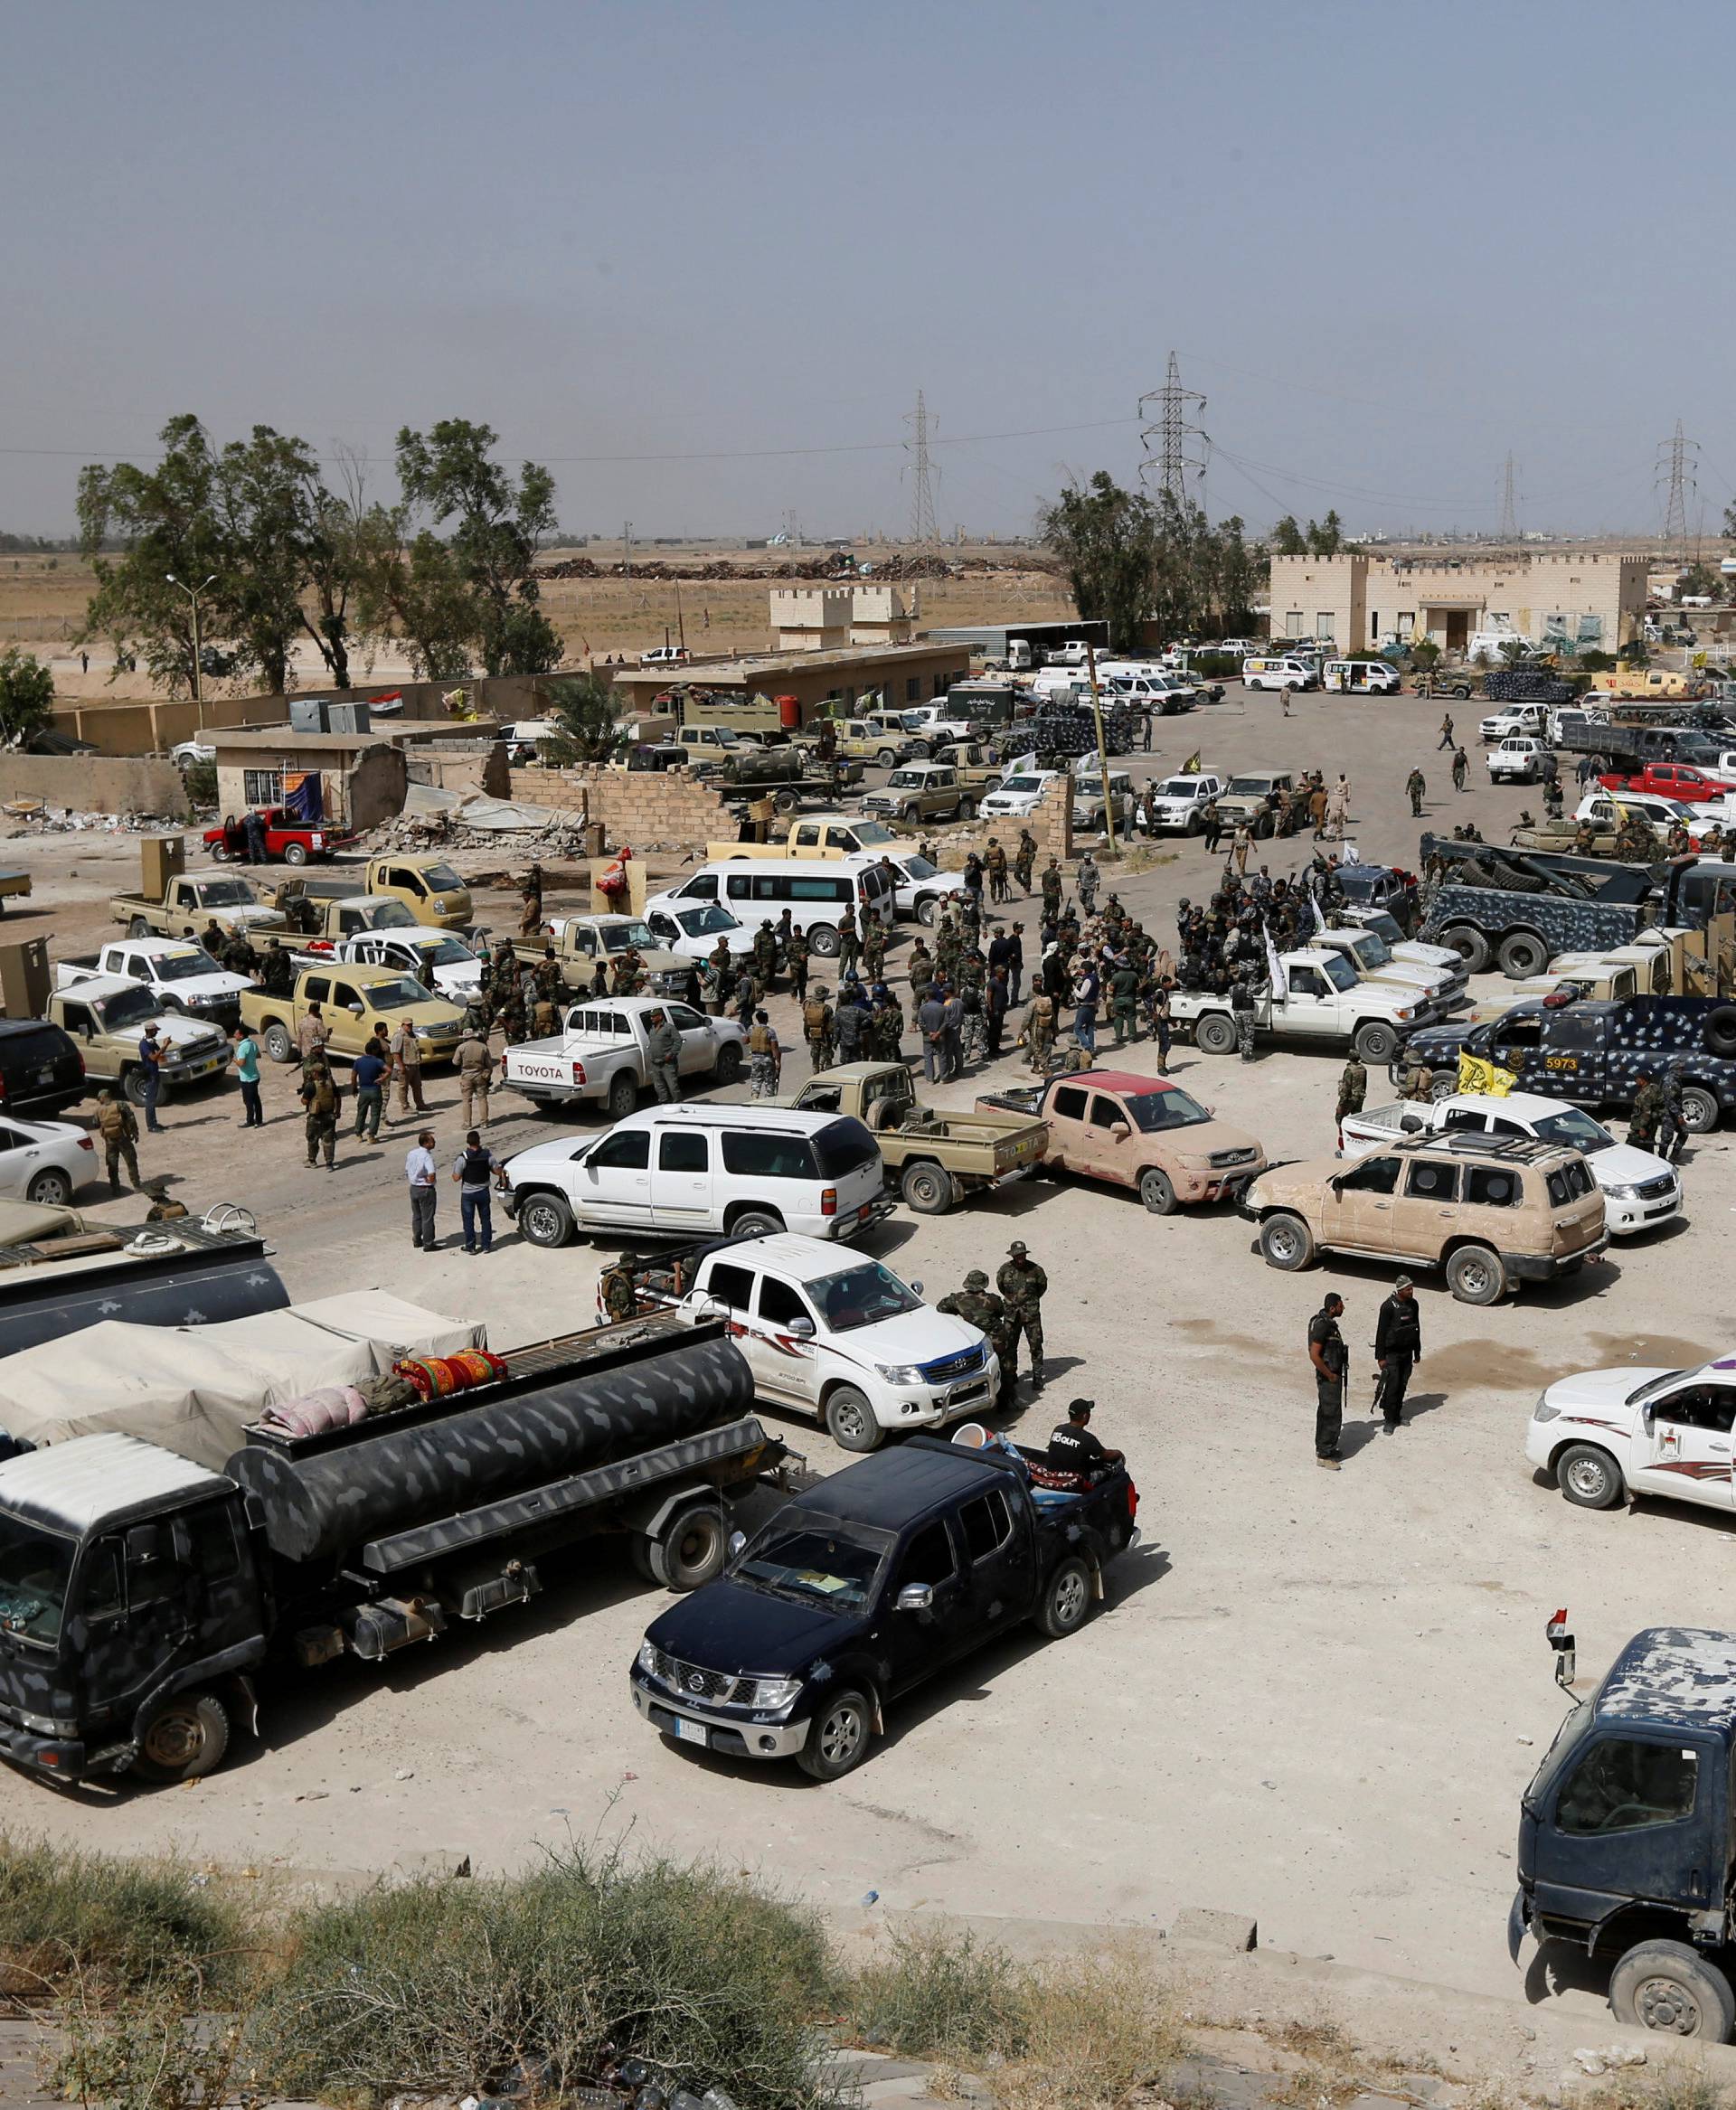 Shi'ite fighters with Iraqi security forces gather near Falluja